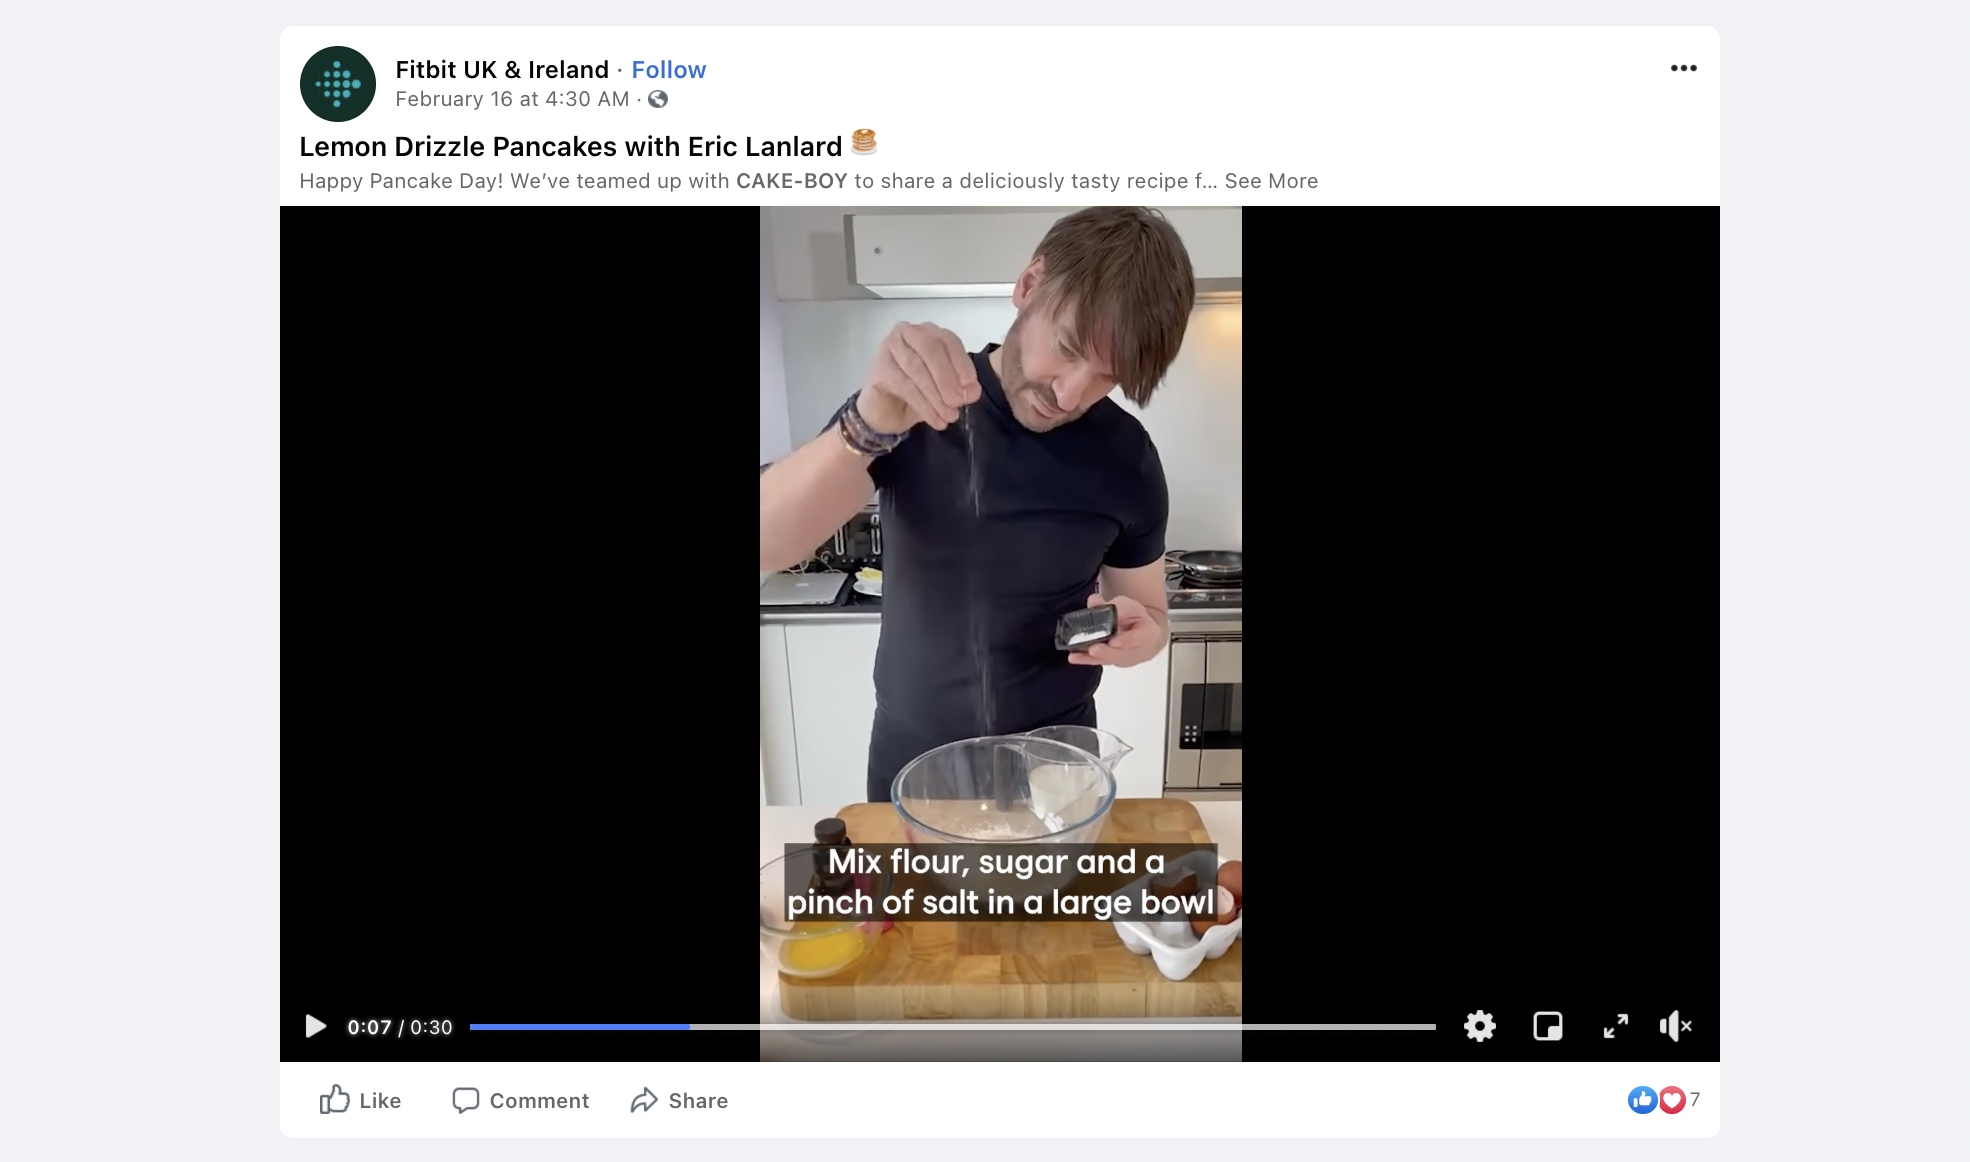 facebook marketing most successful brands video example